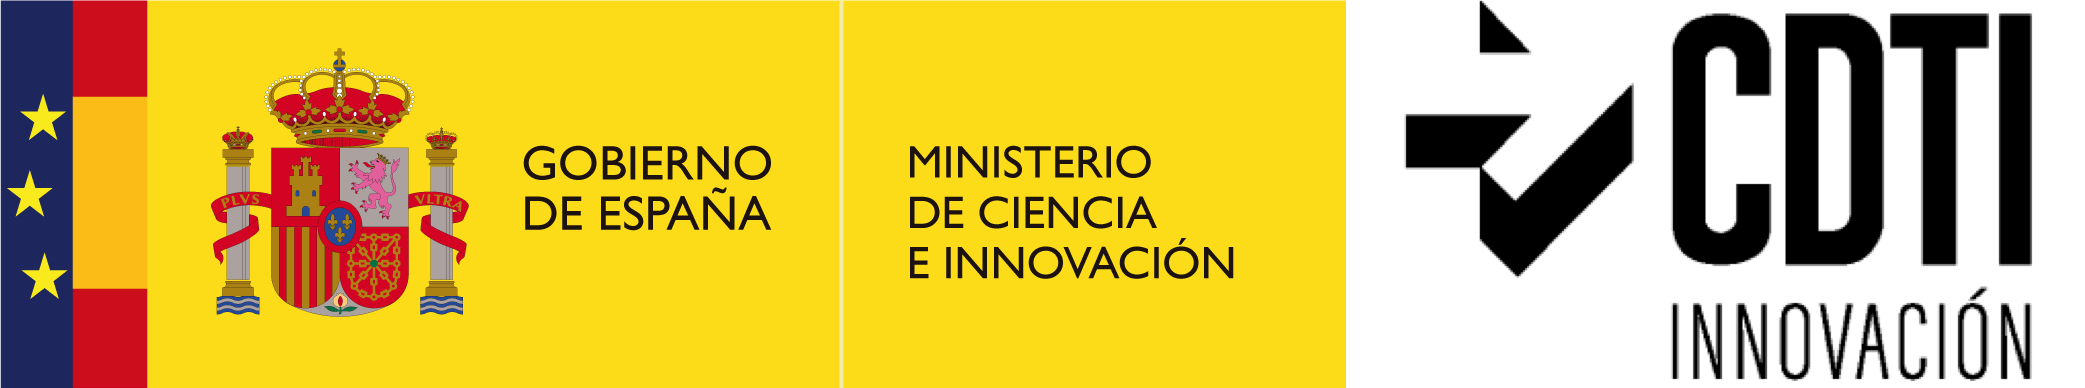 Ministry of Science and Innovation logo